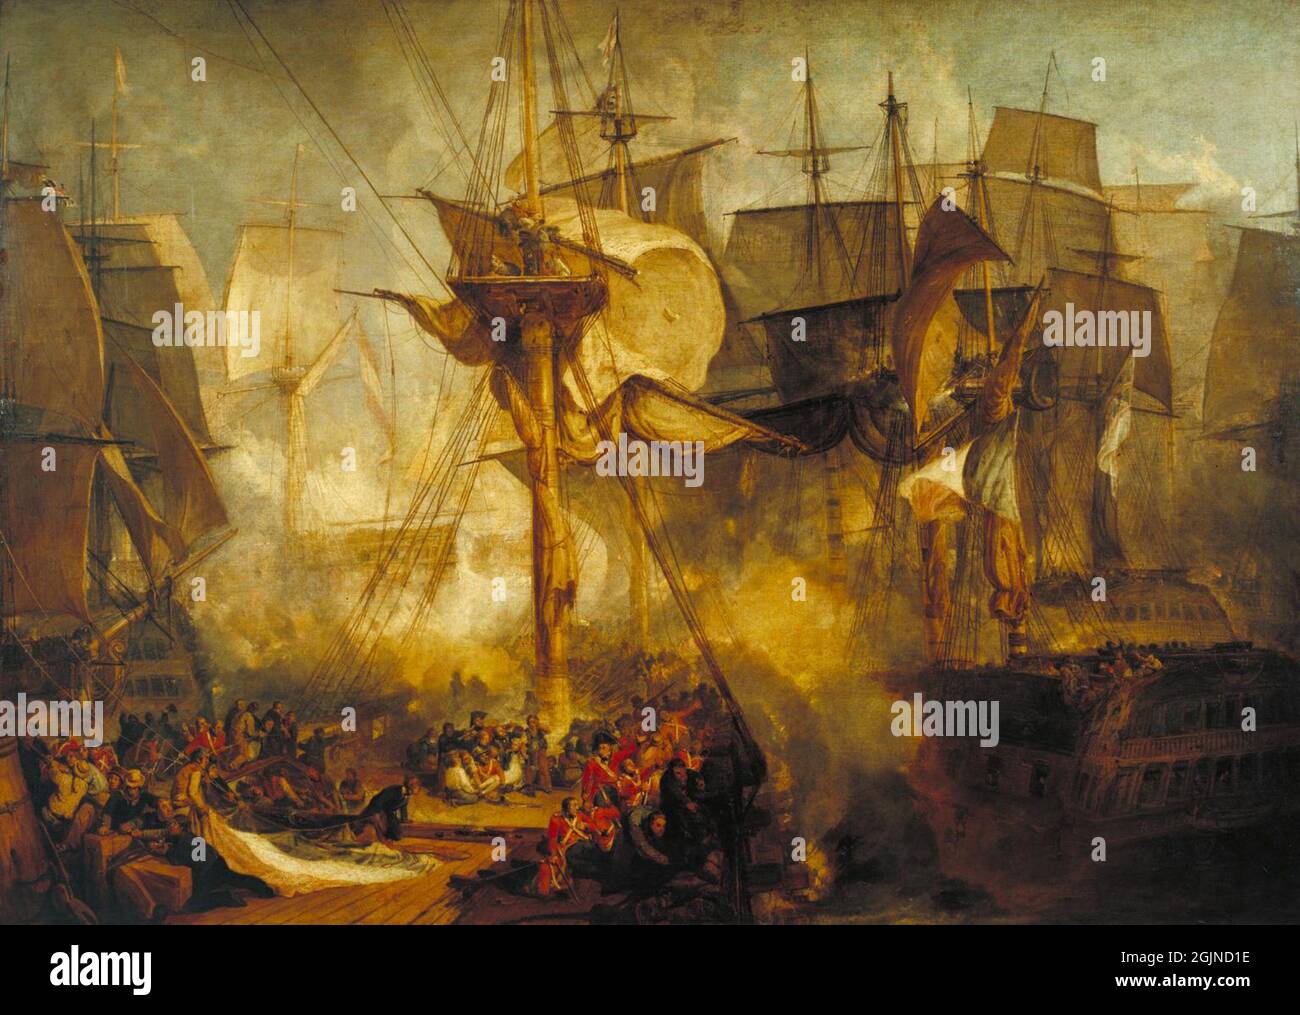 Scenes from The Battle of Trafalgar, in which the French Navy was destroyed. Painting by JMW Turner. Stock Photo